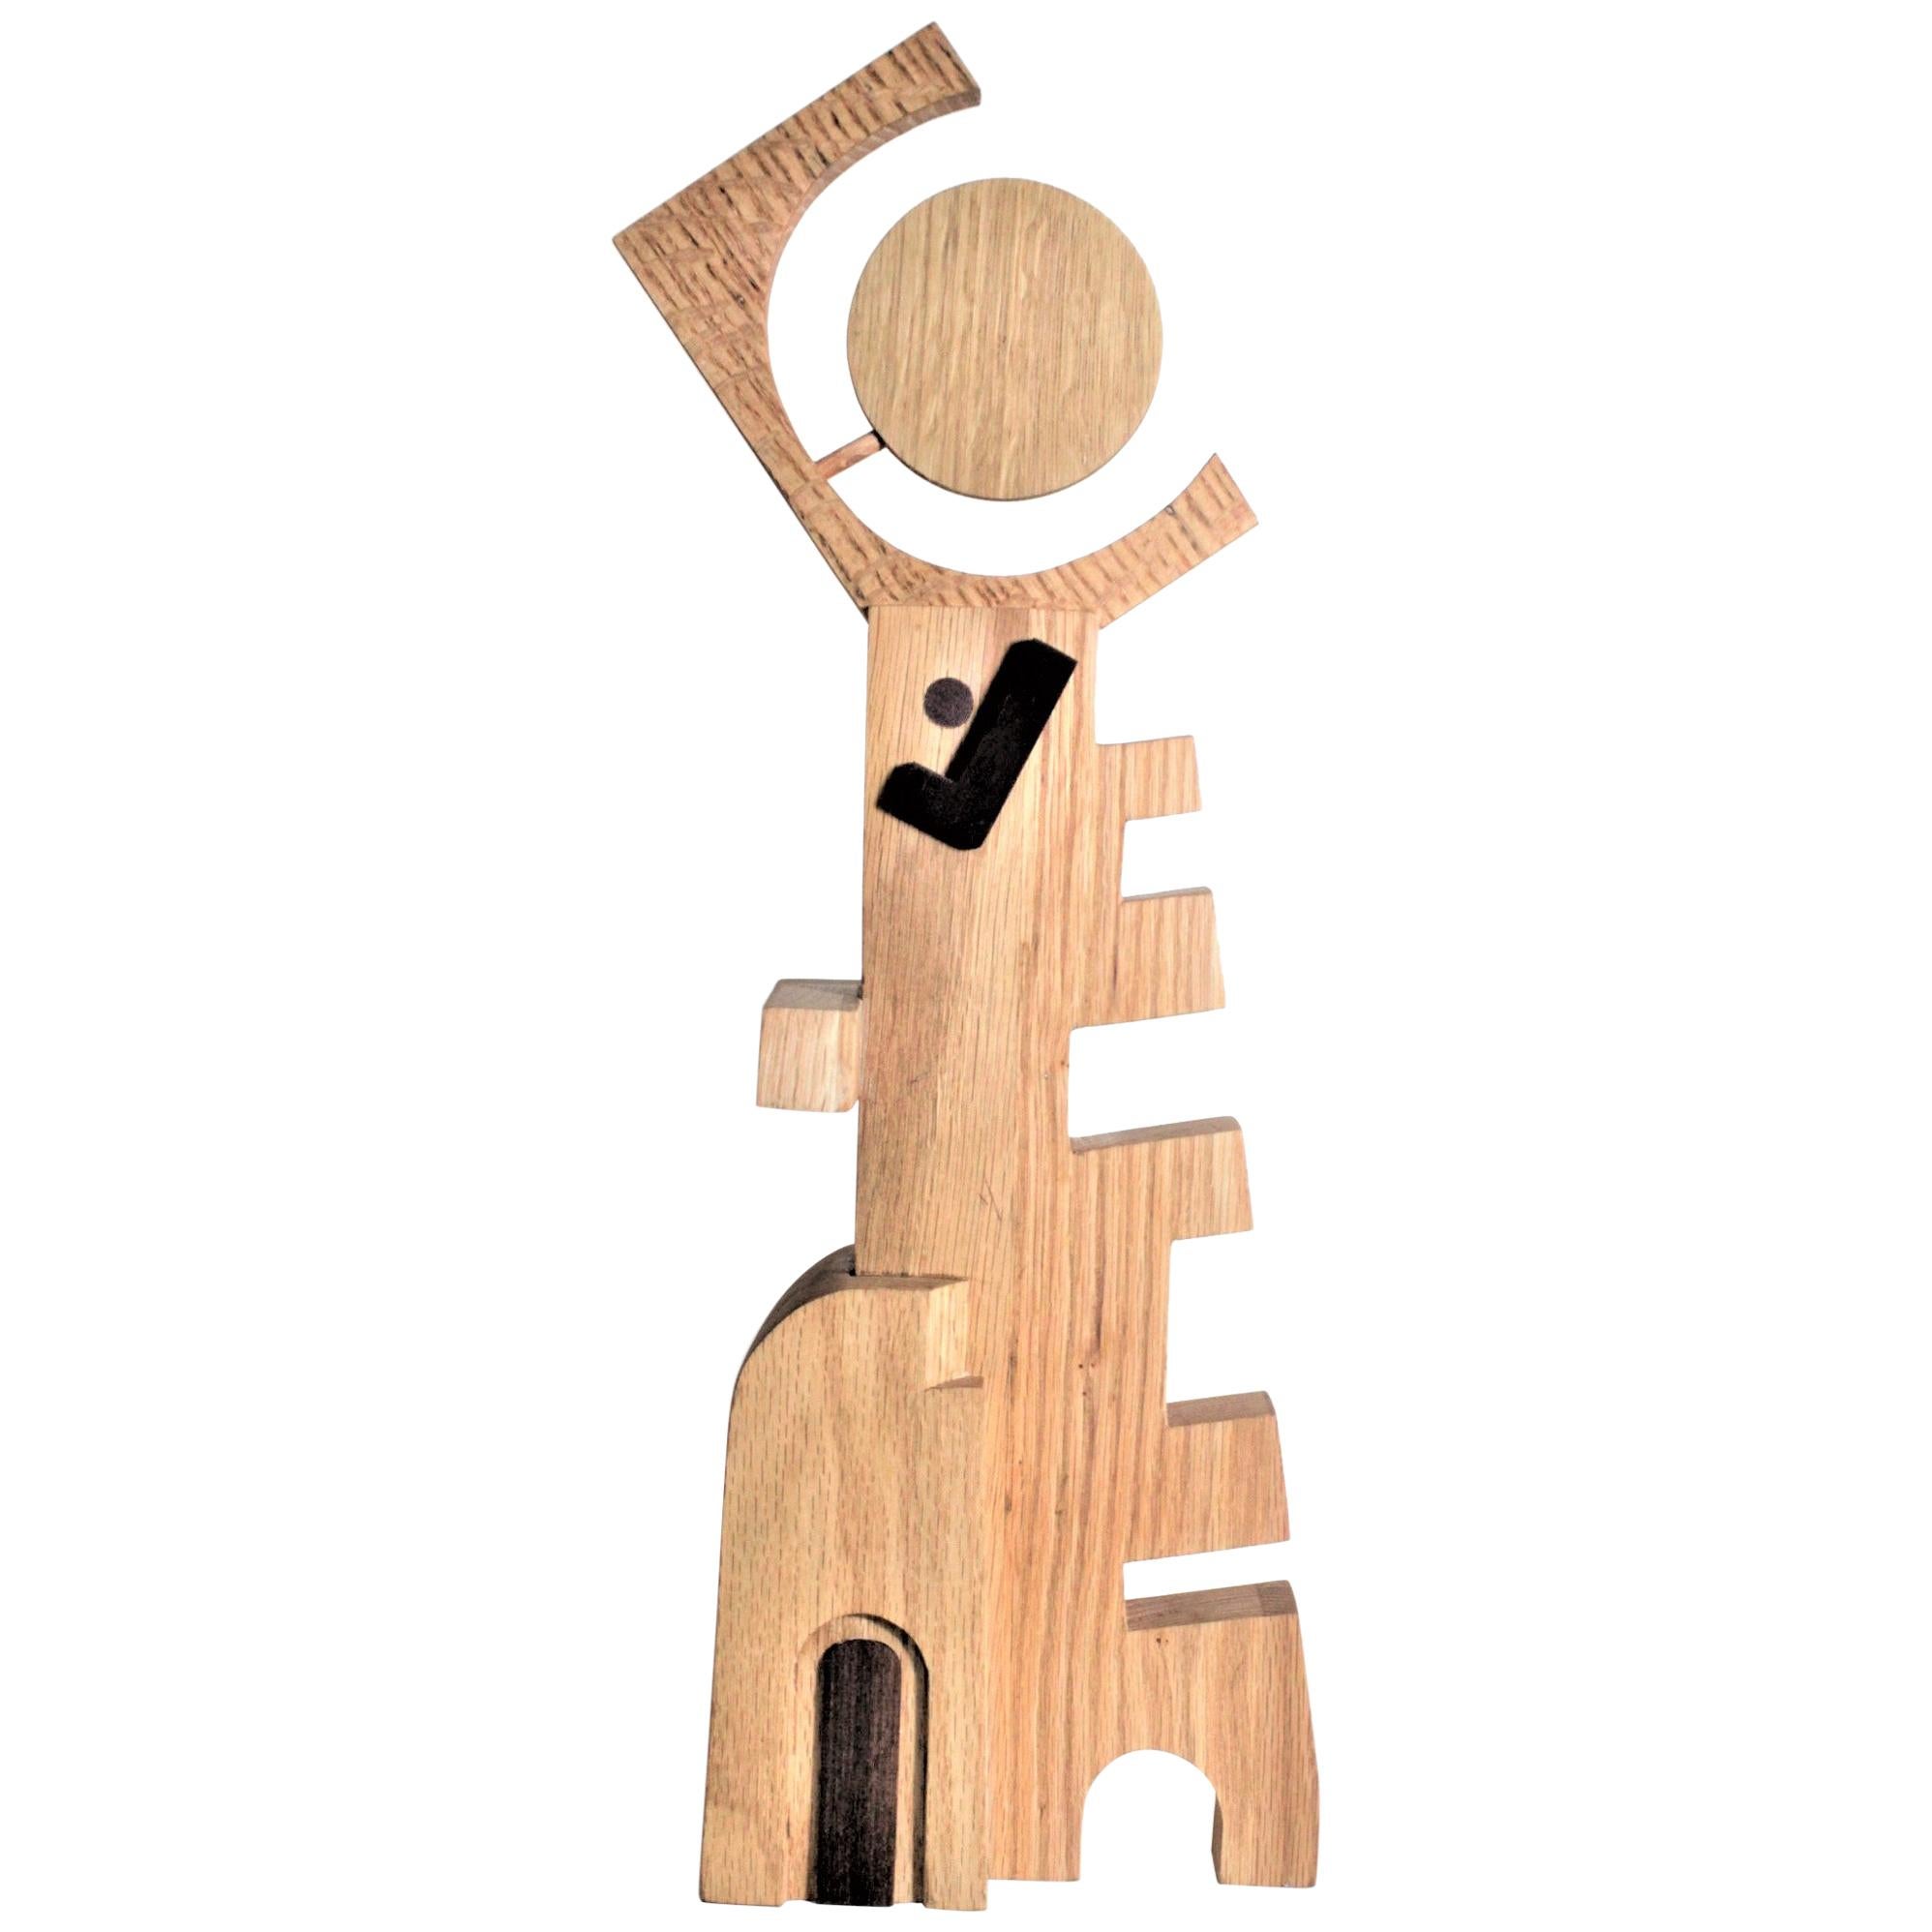 Signed Modern Abstract Constructivist Styled Wooden Sculpture